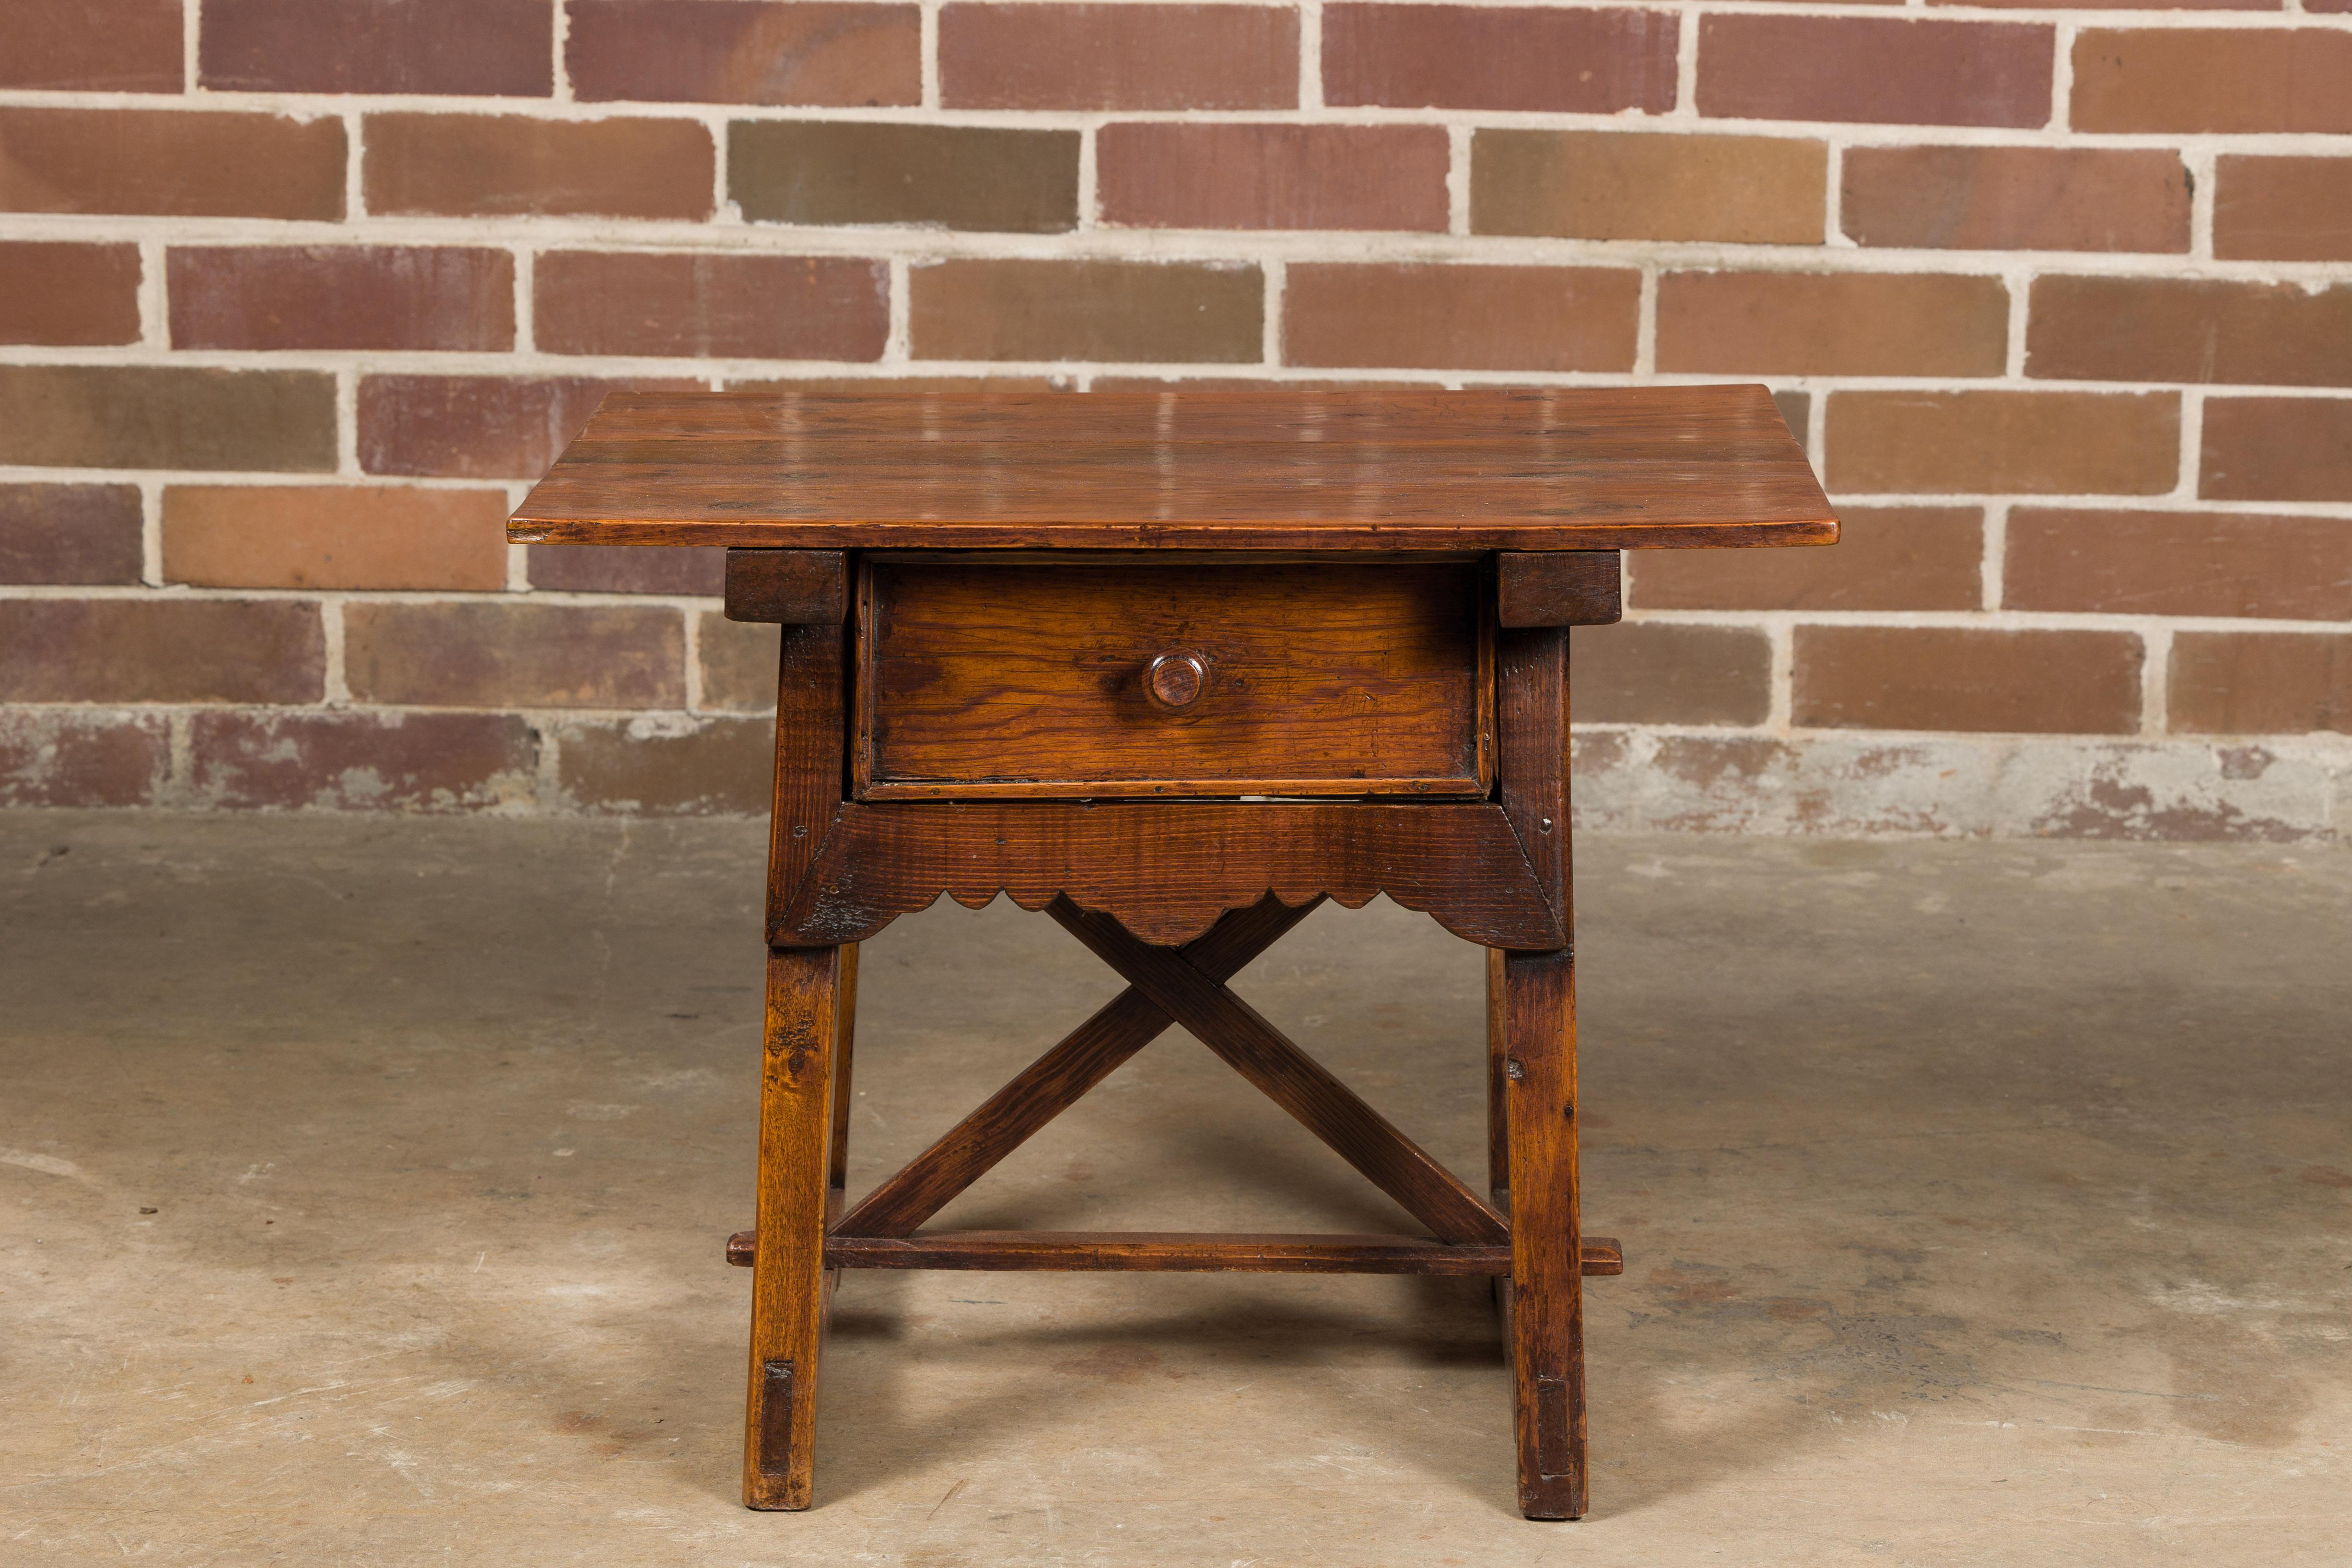 19th Century English Oak Low Side Table with Single Drawer and Carved Apron In Good Condition For Sale In Atlanta, GA